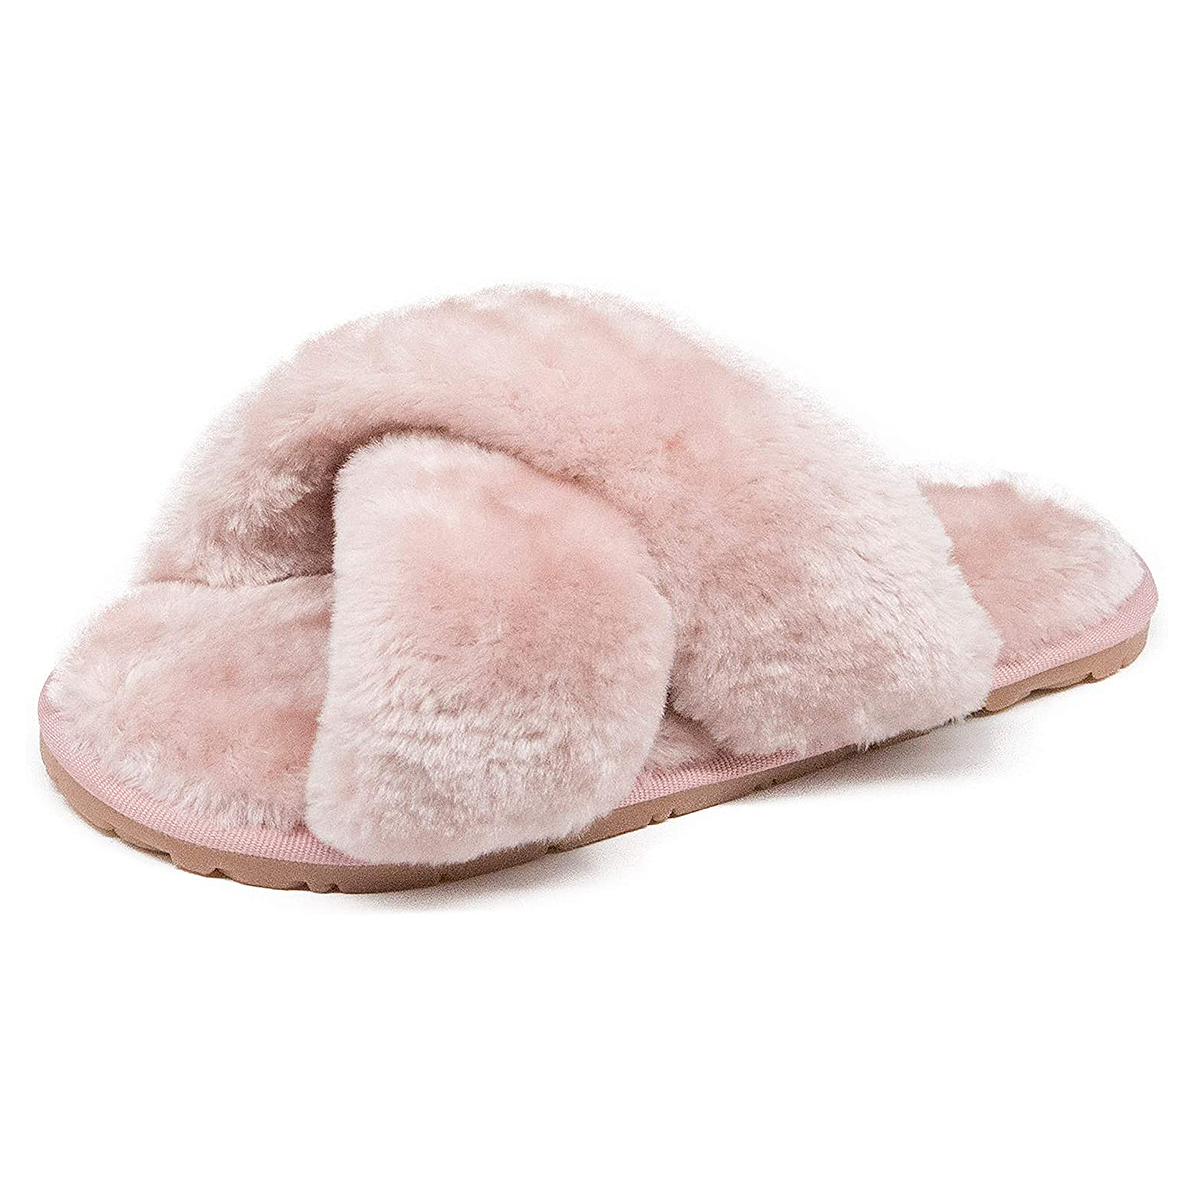 Amazon ‘Spa’ Slippers Feel Like ‘Pillows Under Your Feet’ | UsWeekly